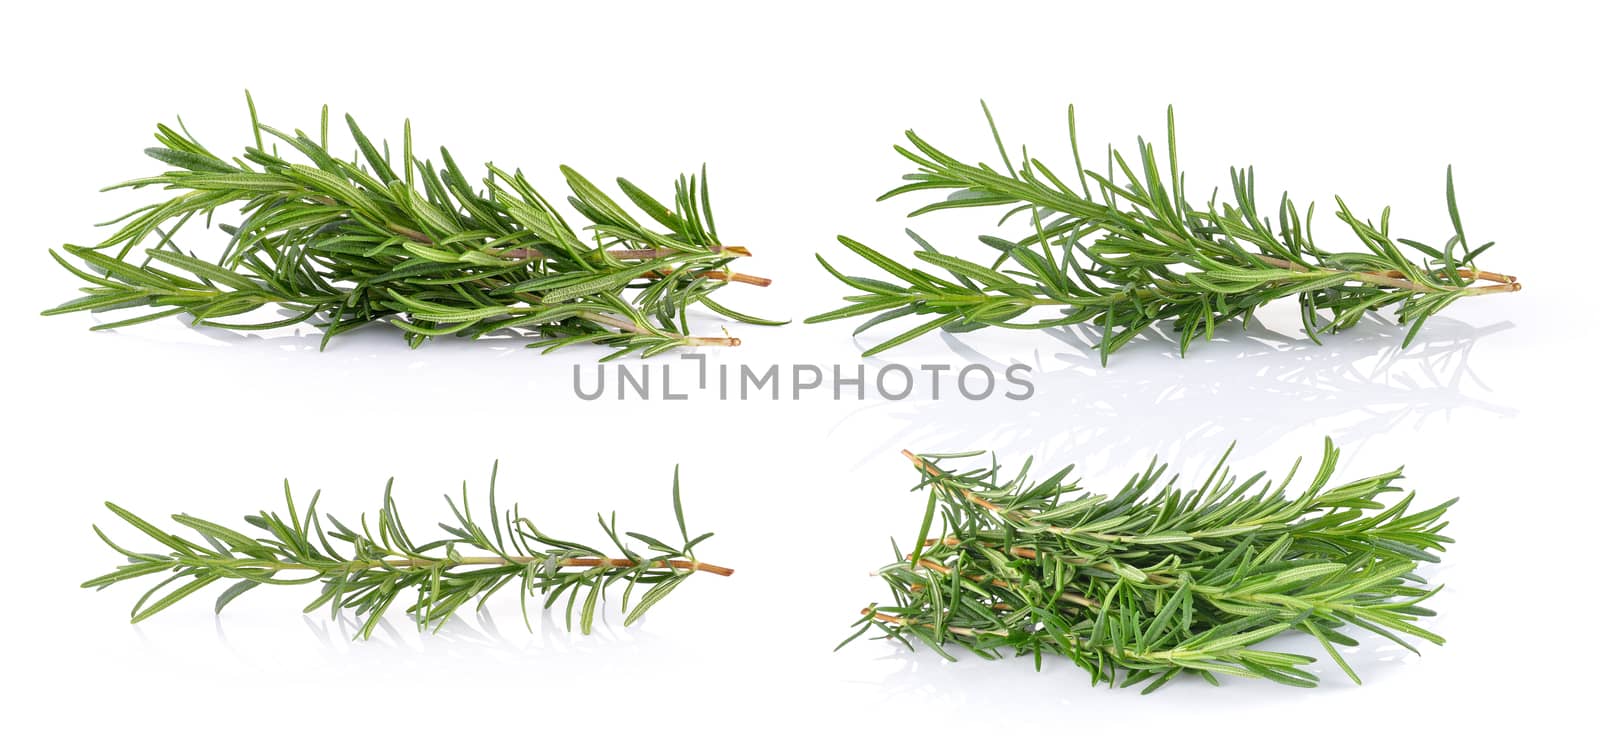 rosemary on white background by sommai